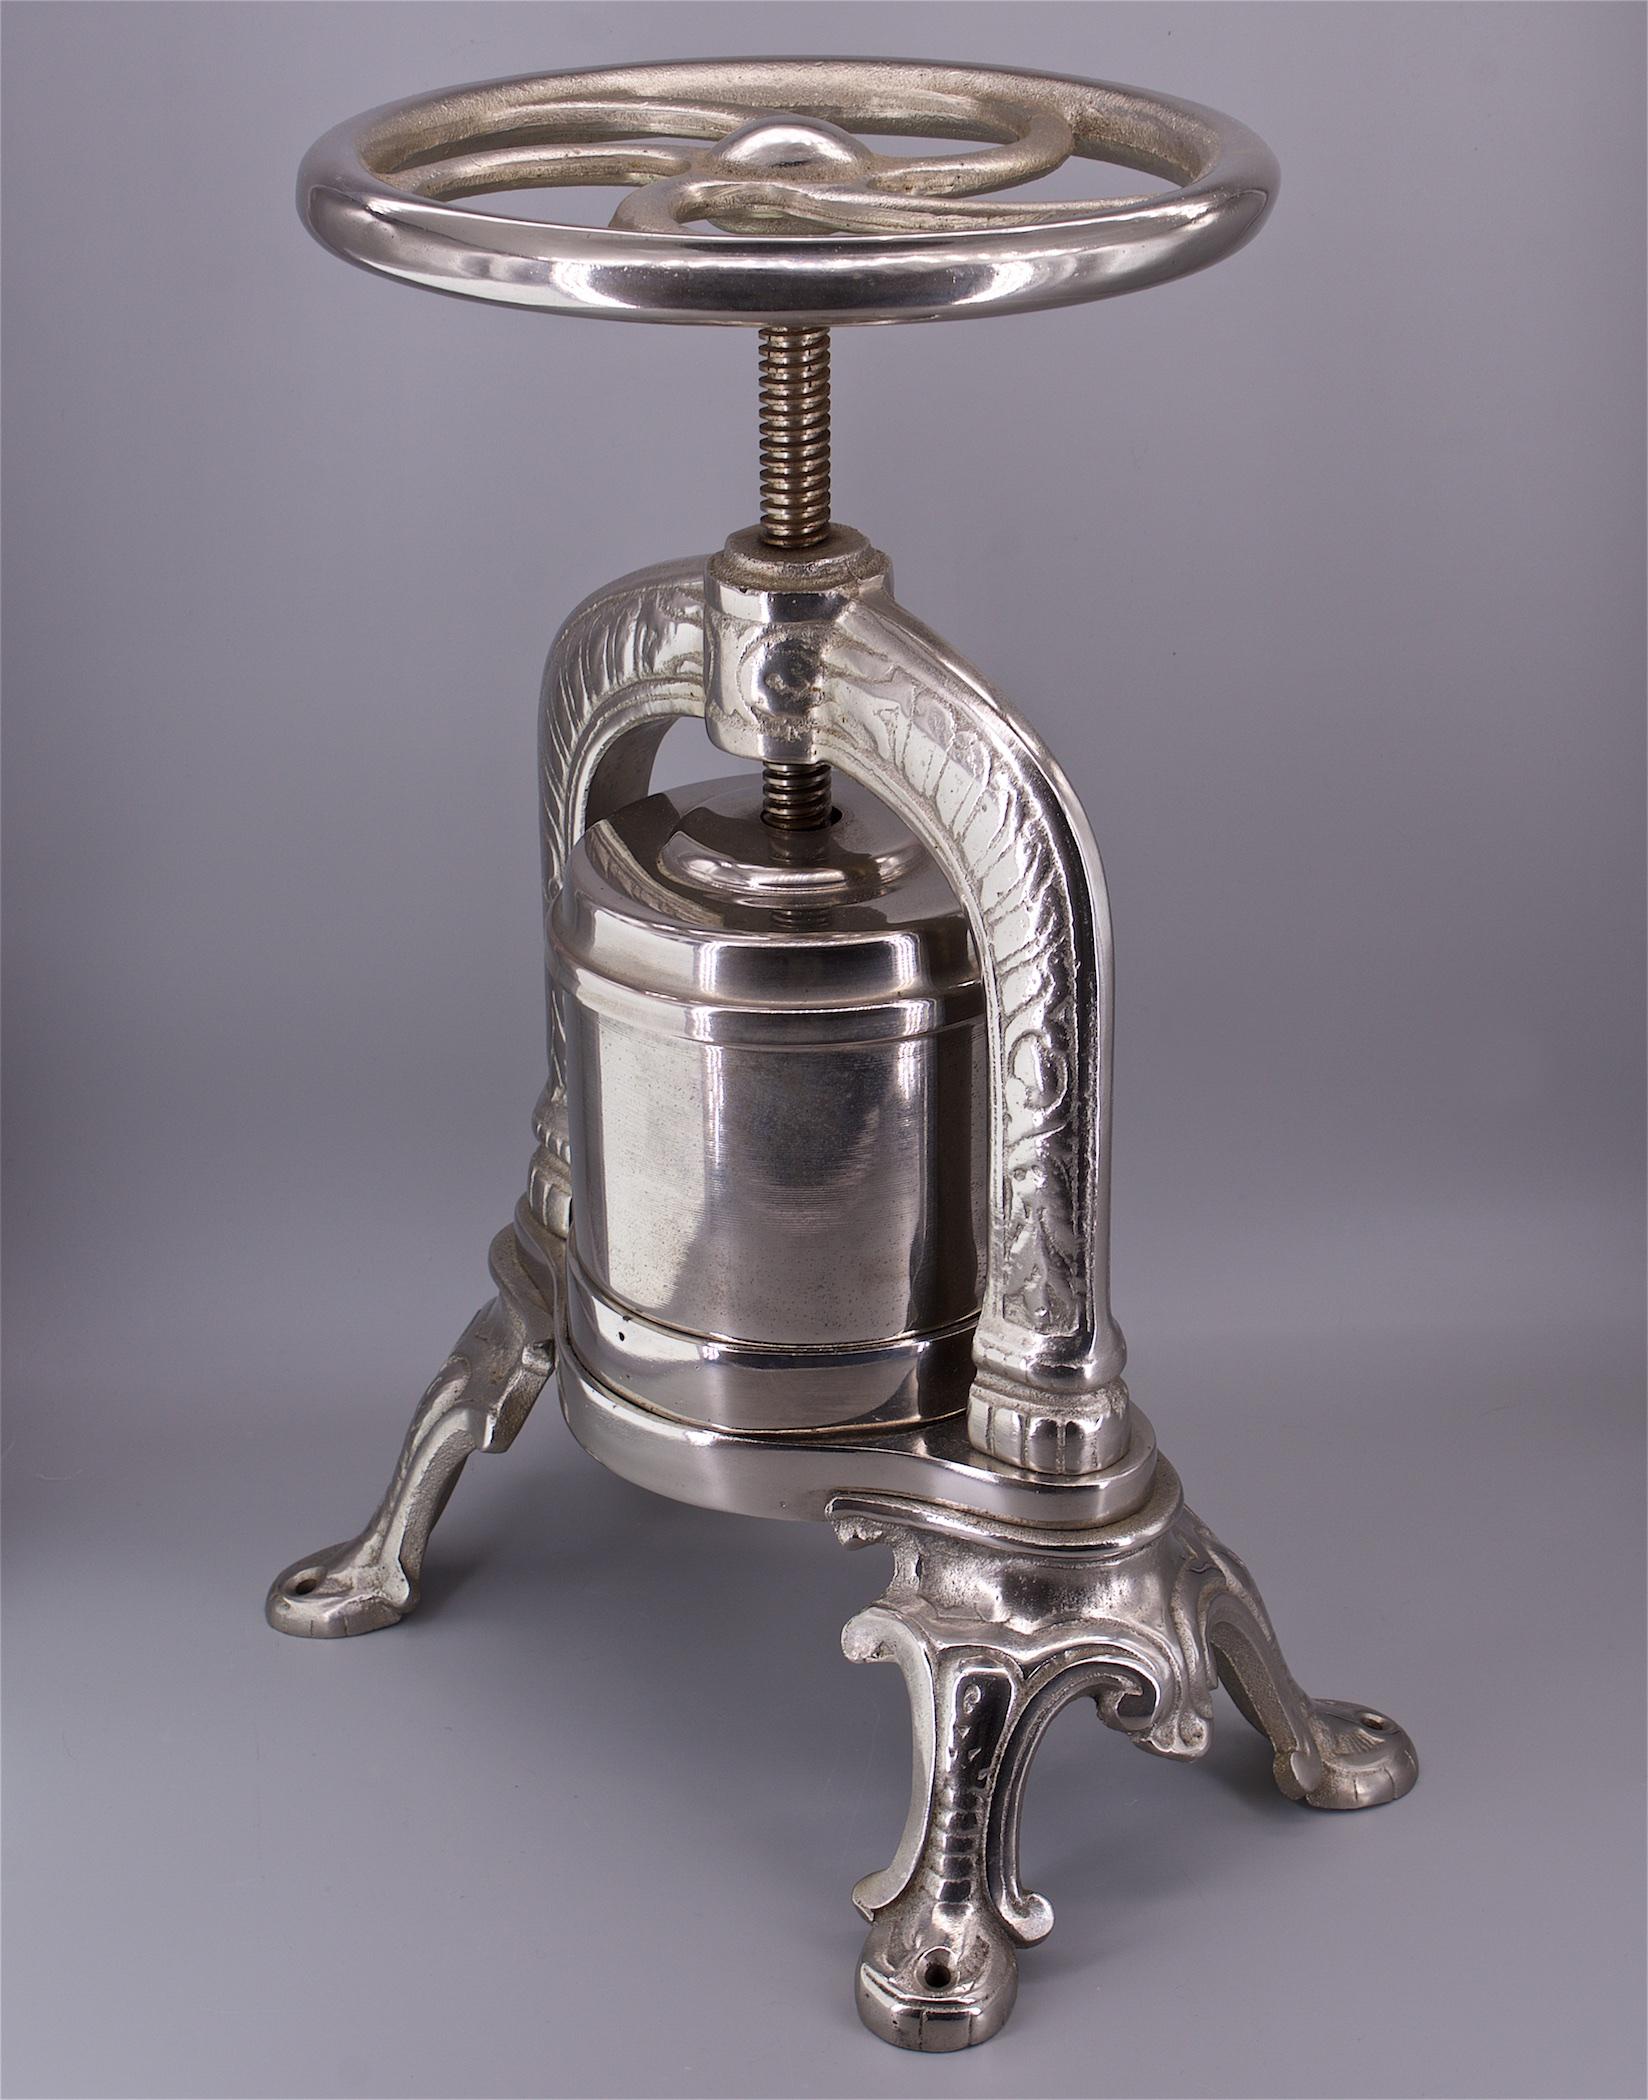 Late Victorian 1900s Polished Nickel French Duck Lobster Press Culinary Cooking Matfer Bourgeat